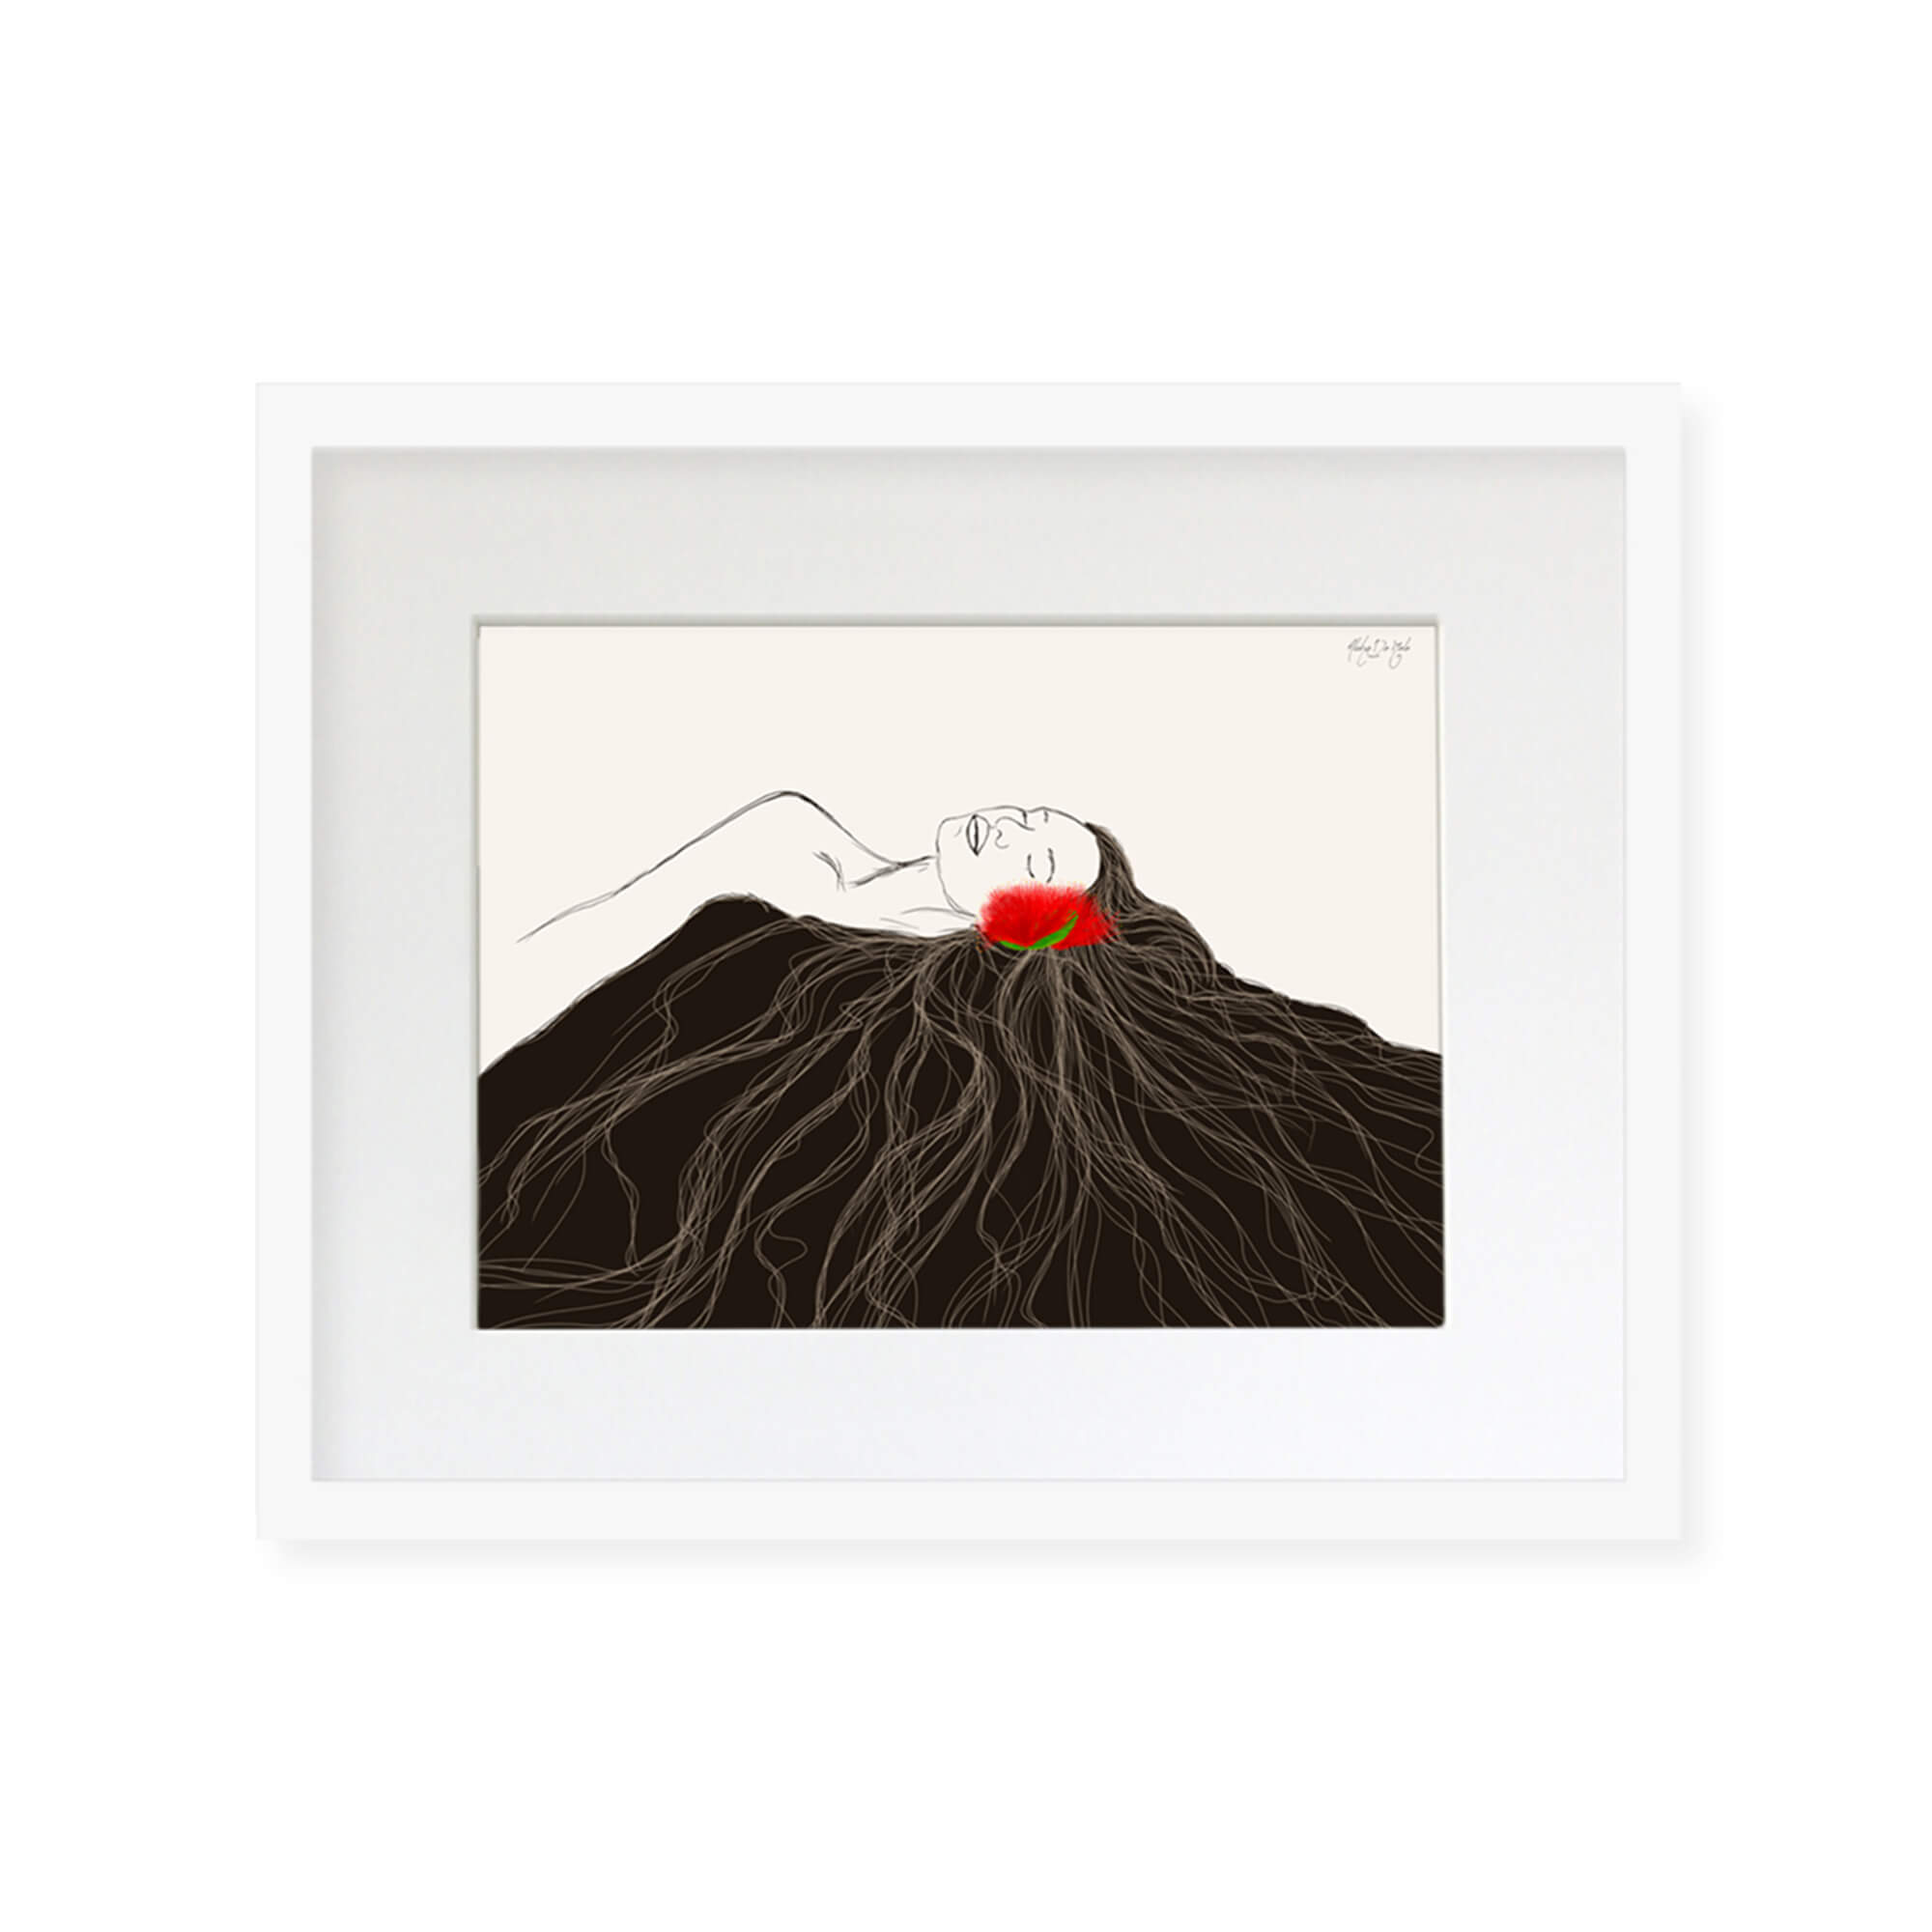 A framed matted art print of a woman with a vibrant red flower by Hawaii artist Aloha De Mele